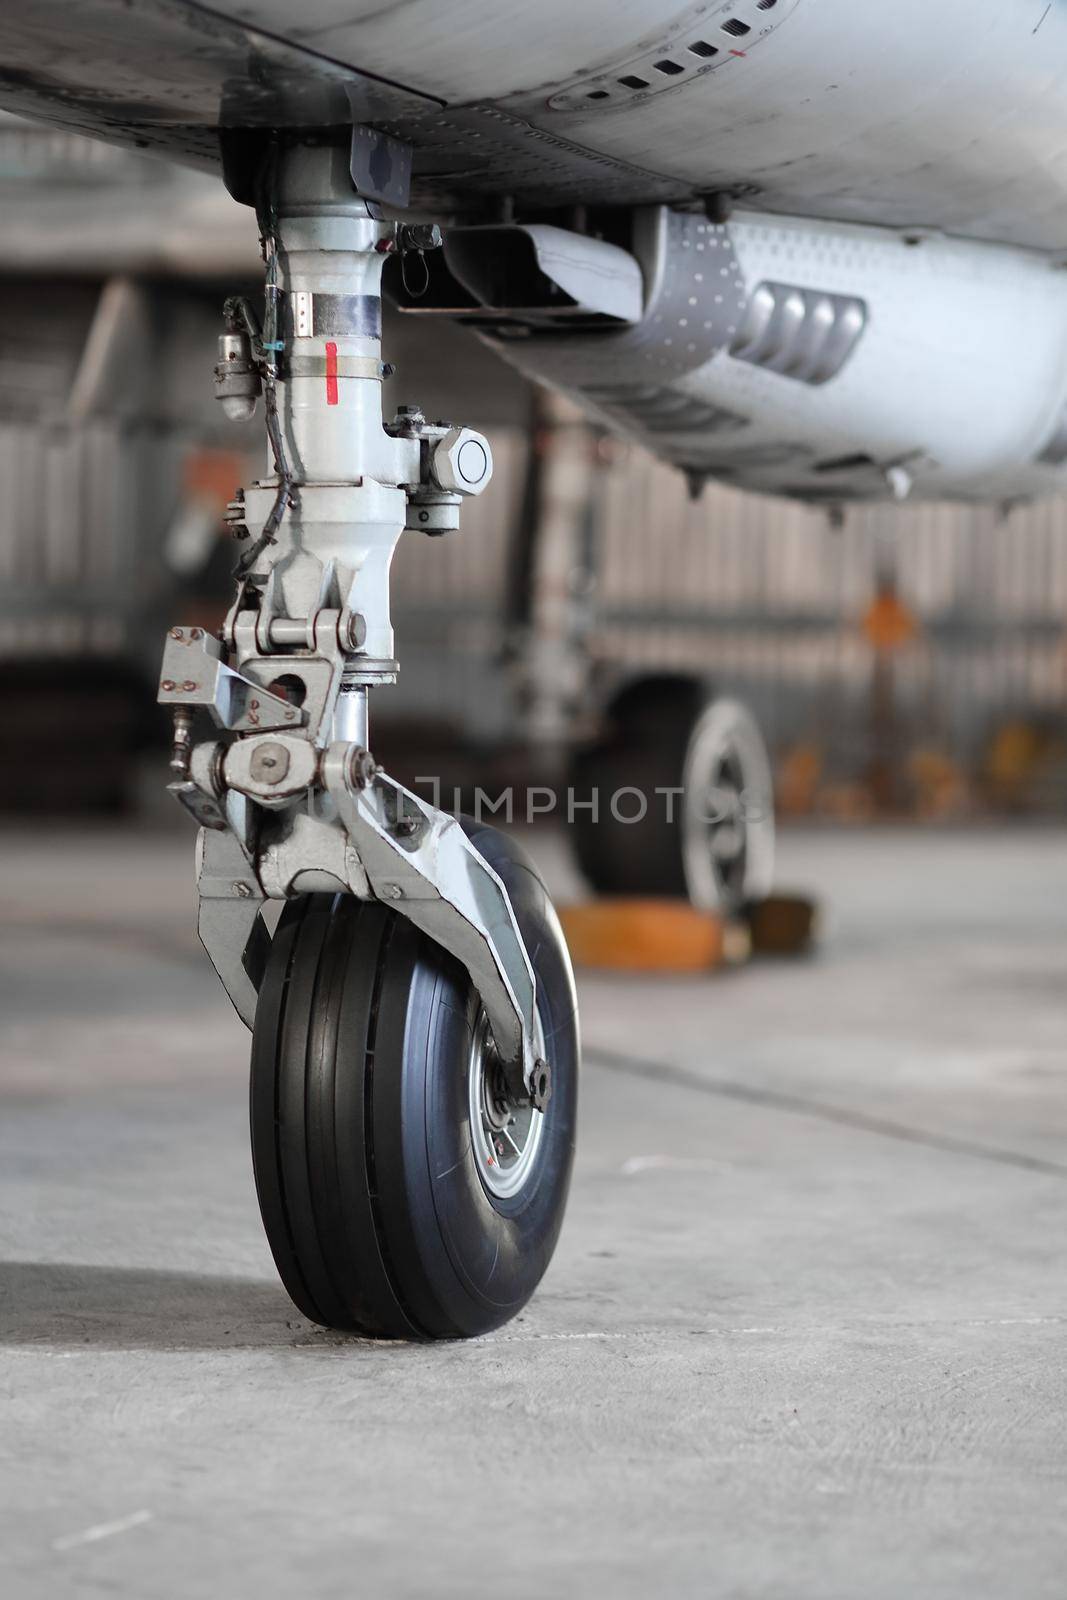 Front landing gear of aircraft on the ground by toa55